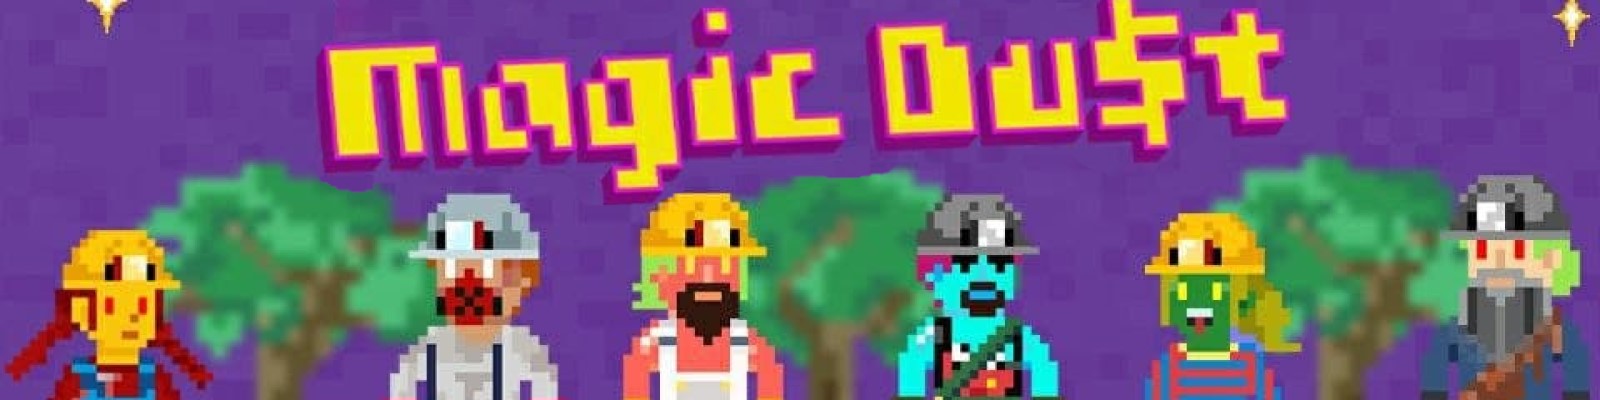 MagicDustMiners Banner